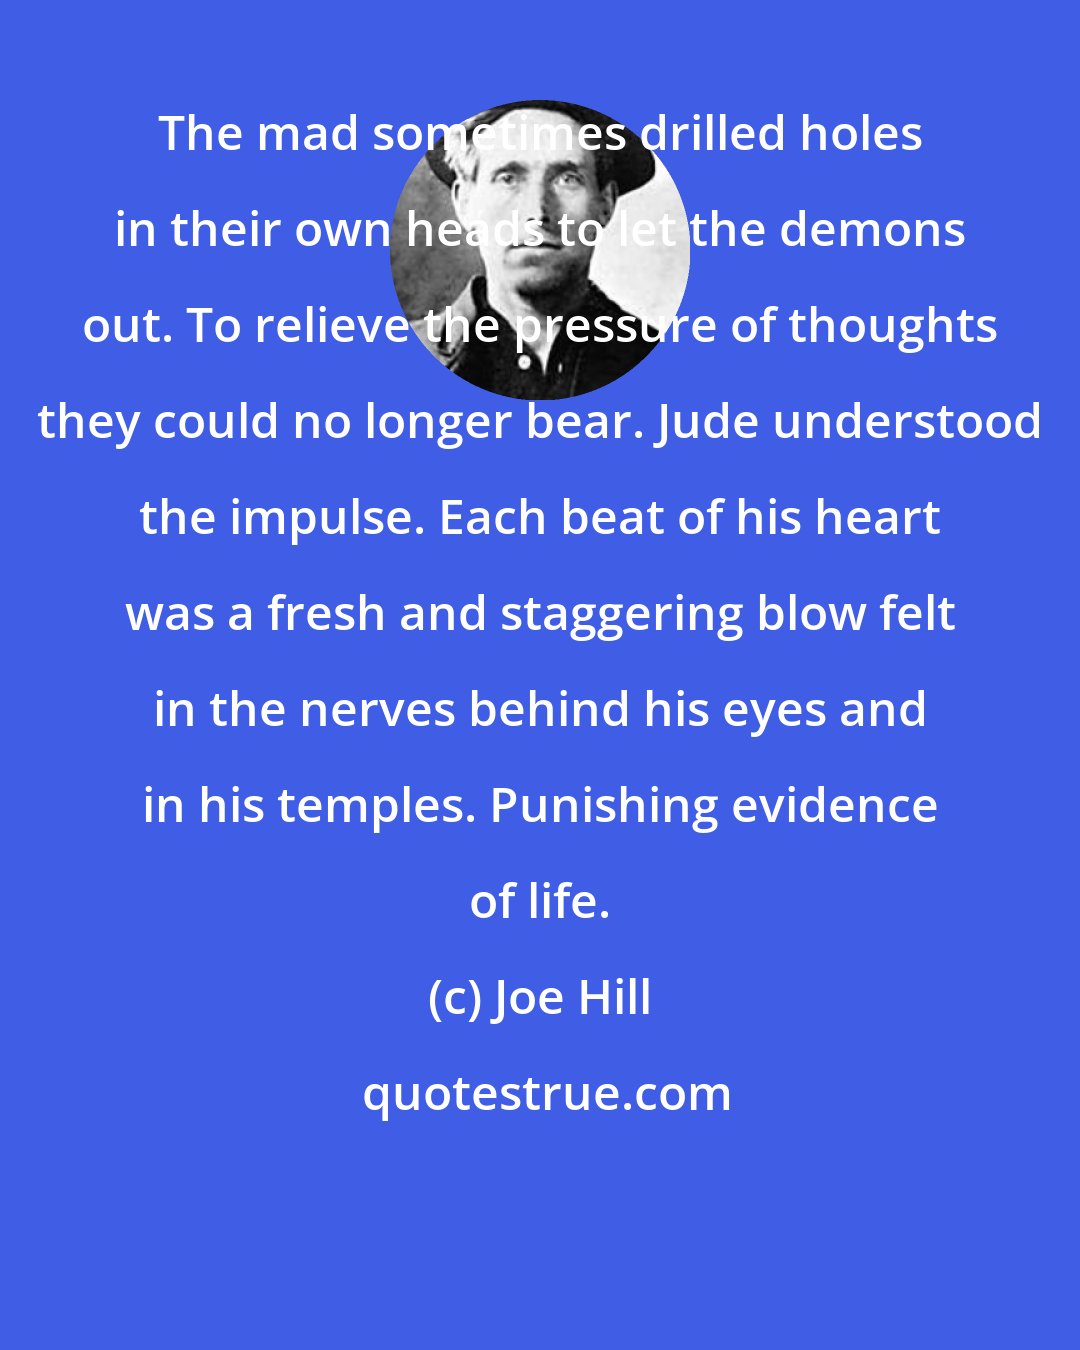 Joe Hill: The mad sometimes drilled holes in their own heads to let the demons out. To relieve the pressure of thoughts they could no longer bear. Jude understood the impulse. Each beat of his heart was a fresh and staggering blow felt in the nerves behind his eyes and in his temples. Punishing evidence of life.